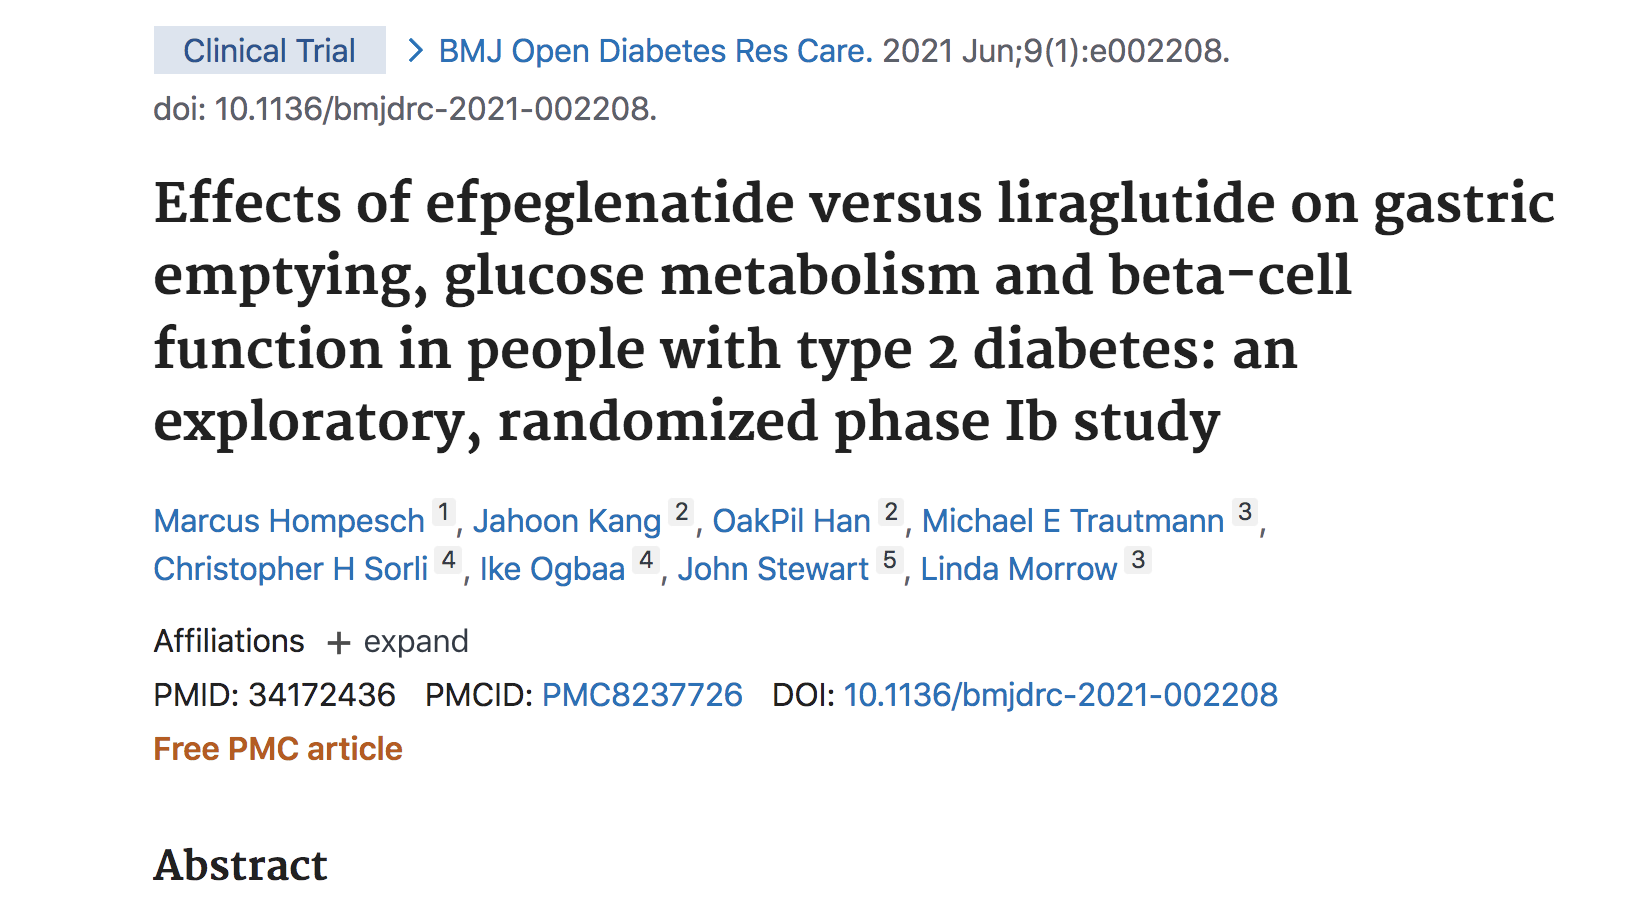 image of Effects of efpeglenatide versus liraglutide on gastric emptying, glucose metabolism and beta-cell function in people with type 2 diabetes: an exploratory, randomized phase Ib study.